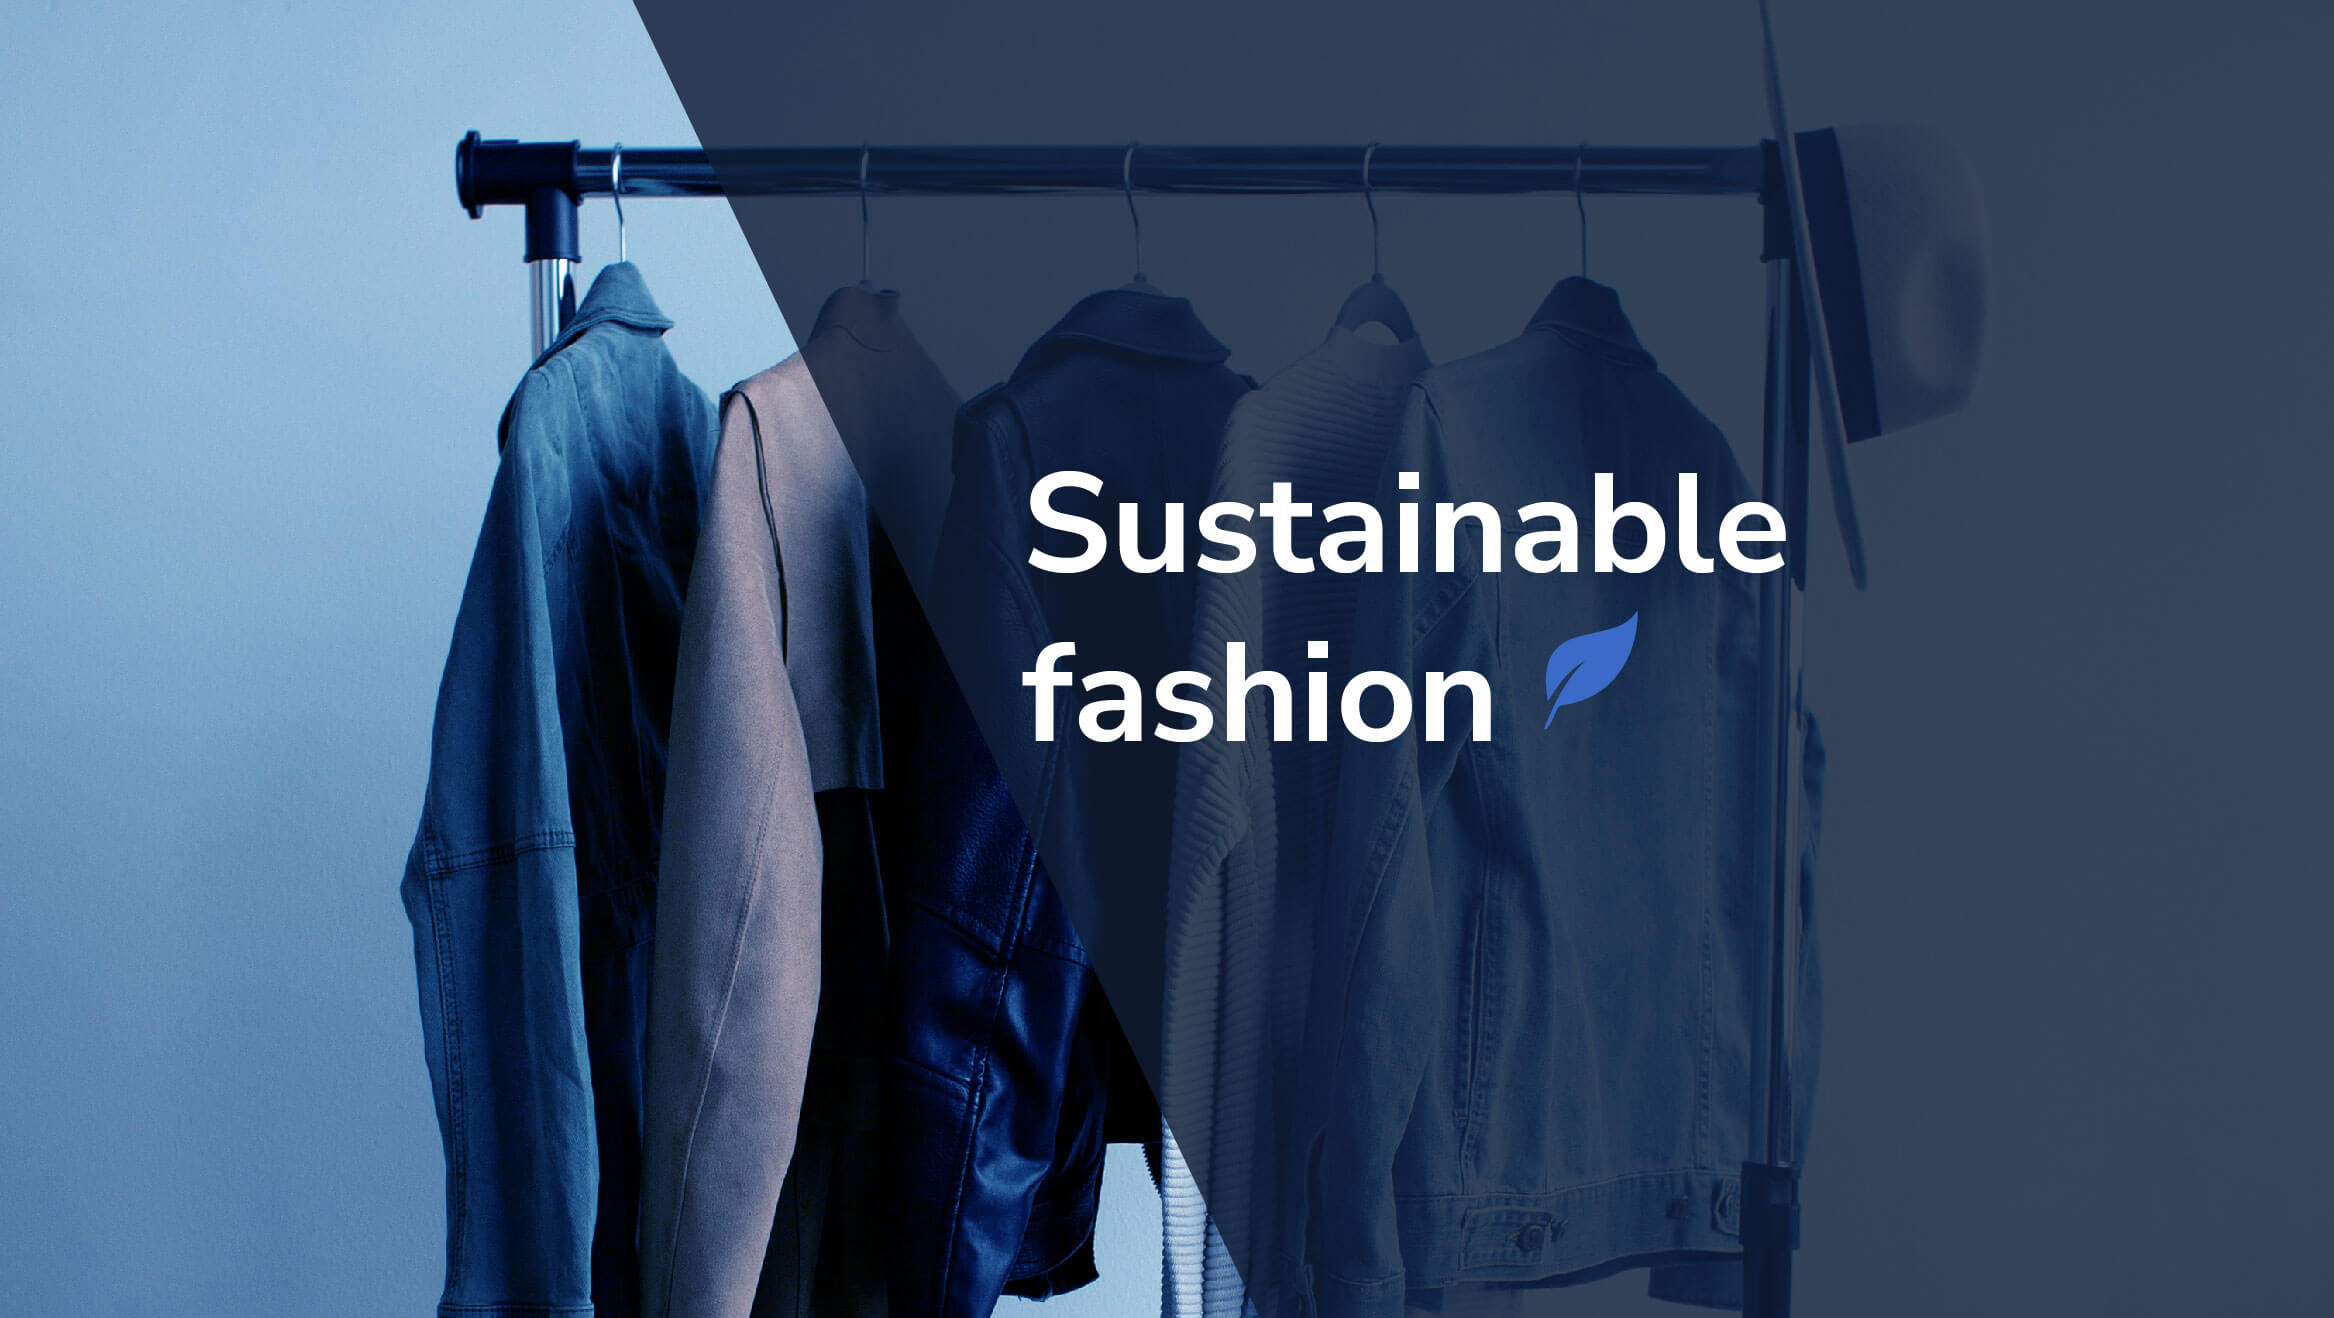 Sustainable fashion what does it involve?